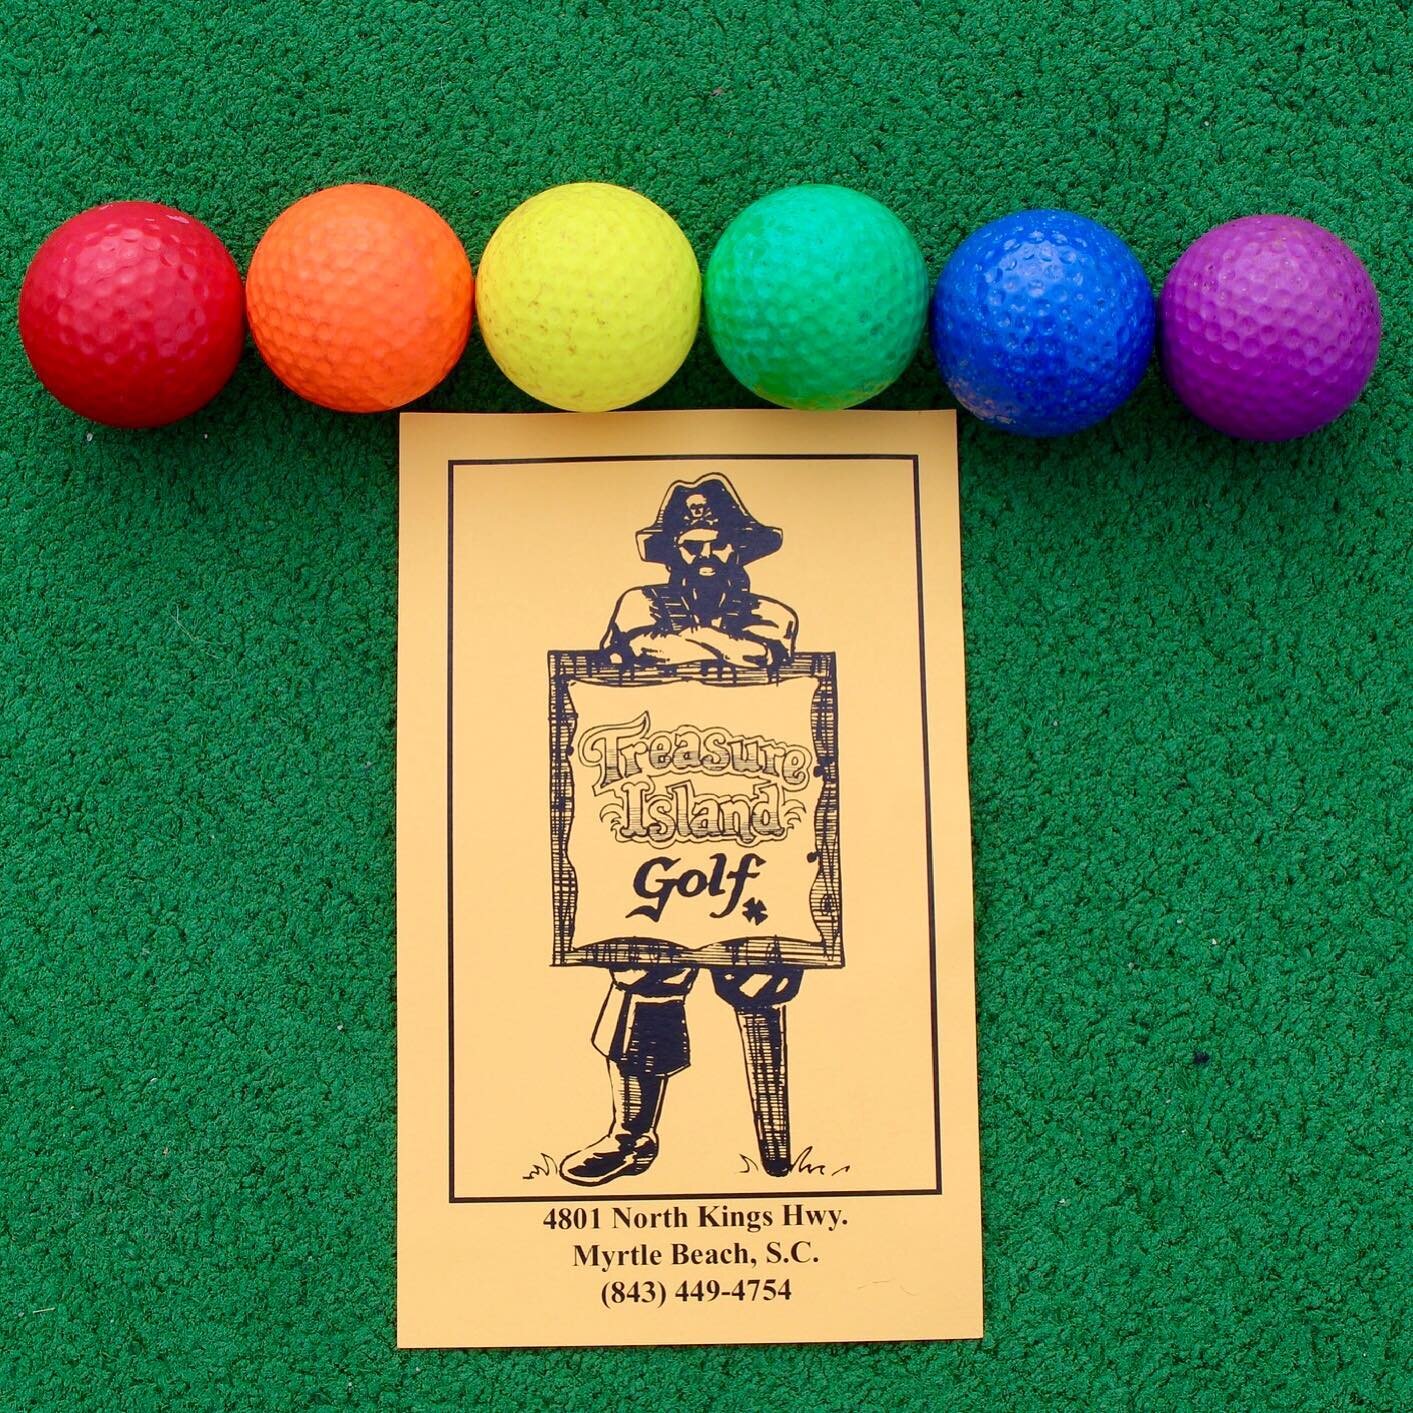 It&rsquo;s time for a round of miniature golf! What color ball will you be using?